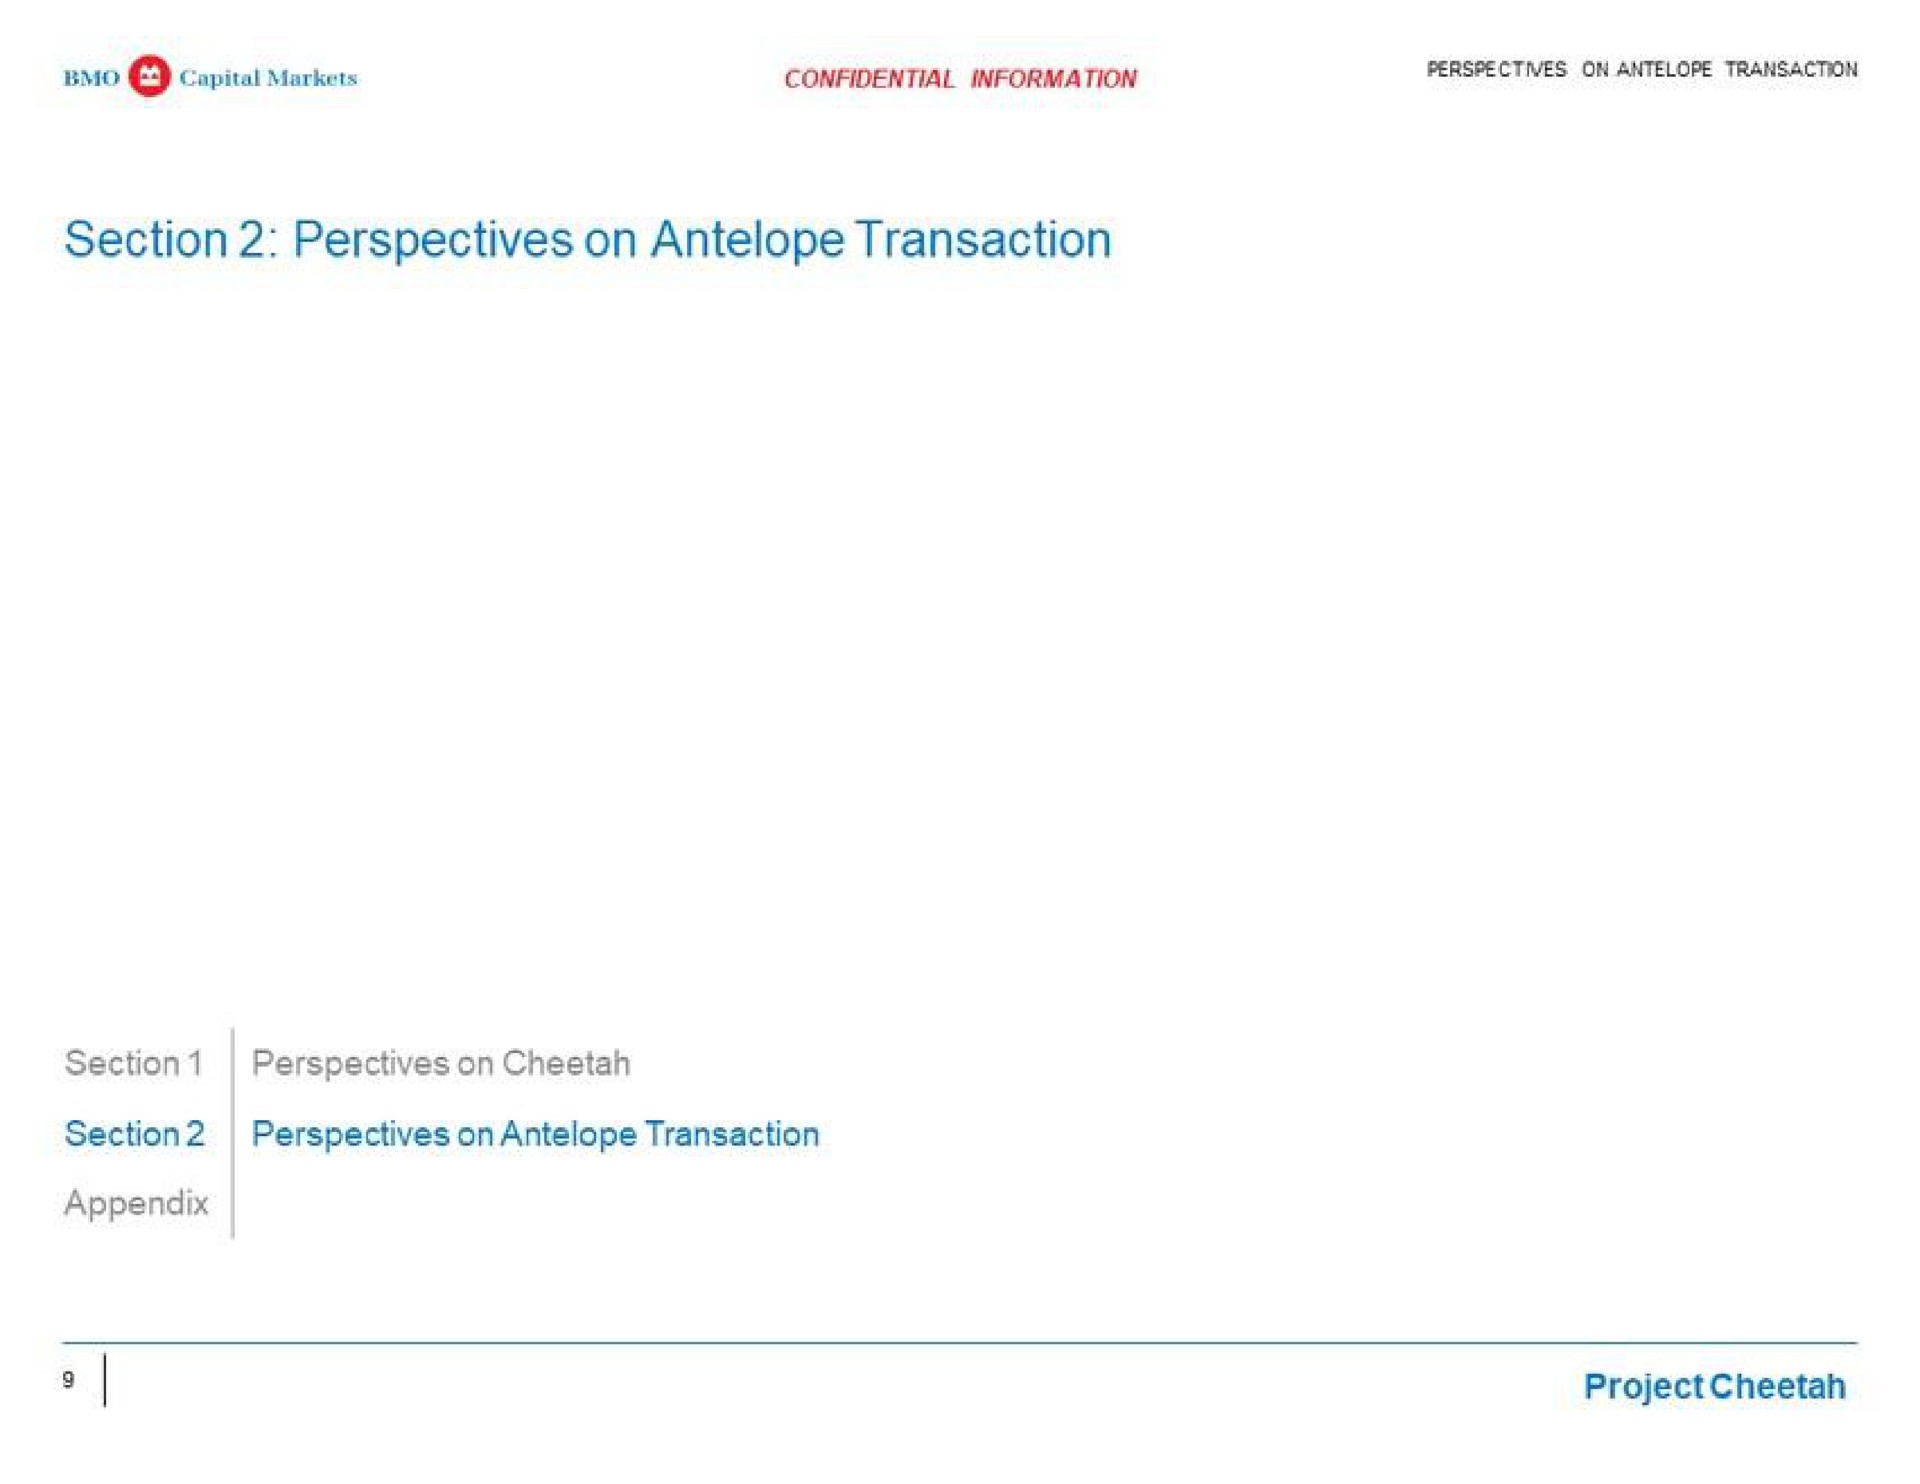 section perspectives on antelope transaction section perspectives on antelope transaction appendix a project cheetah | BMO Capital Markets